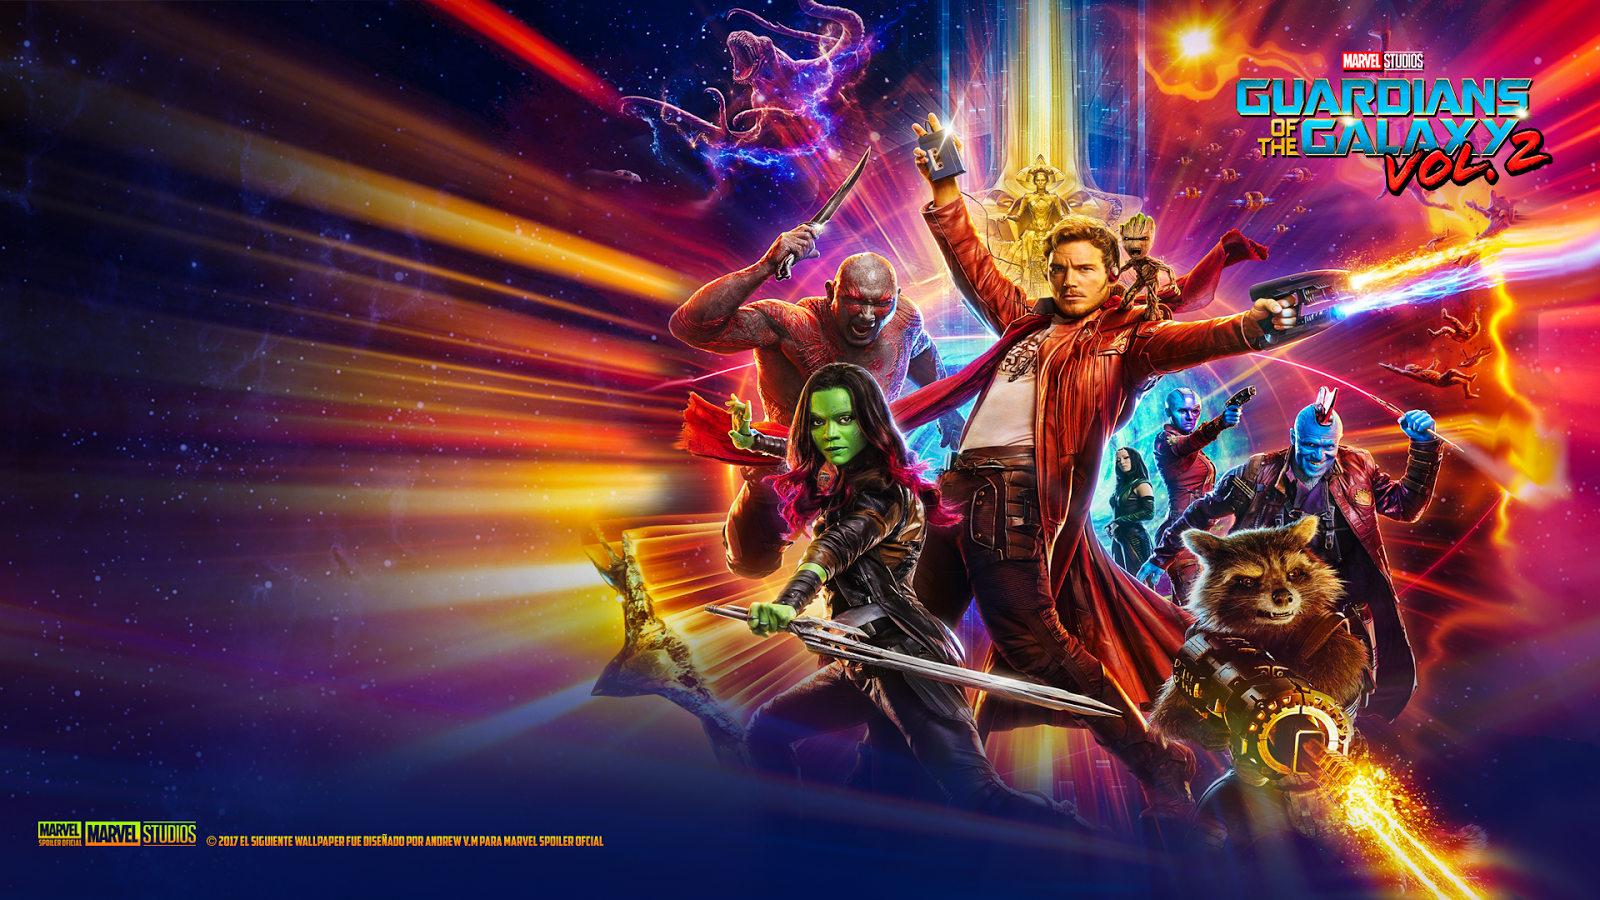 [51+] Guardians Of The Galaxy Vol. 2 Wallpapers on ...